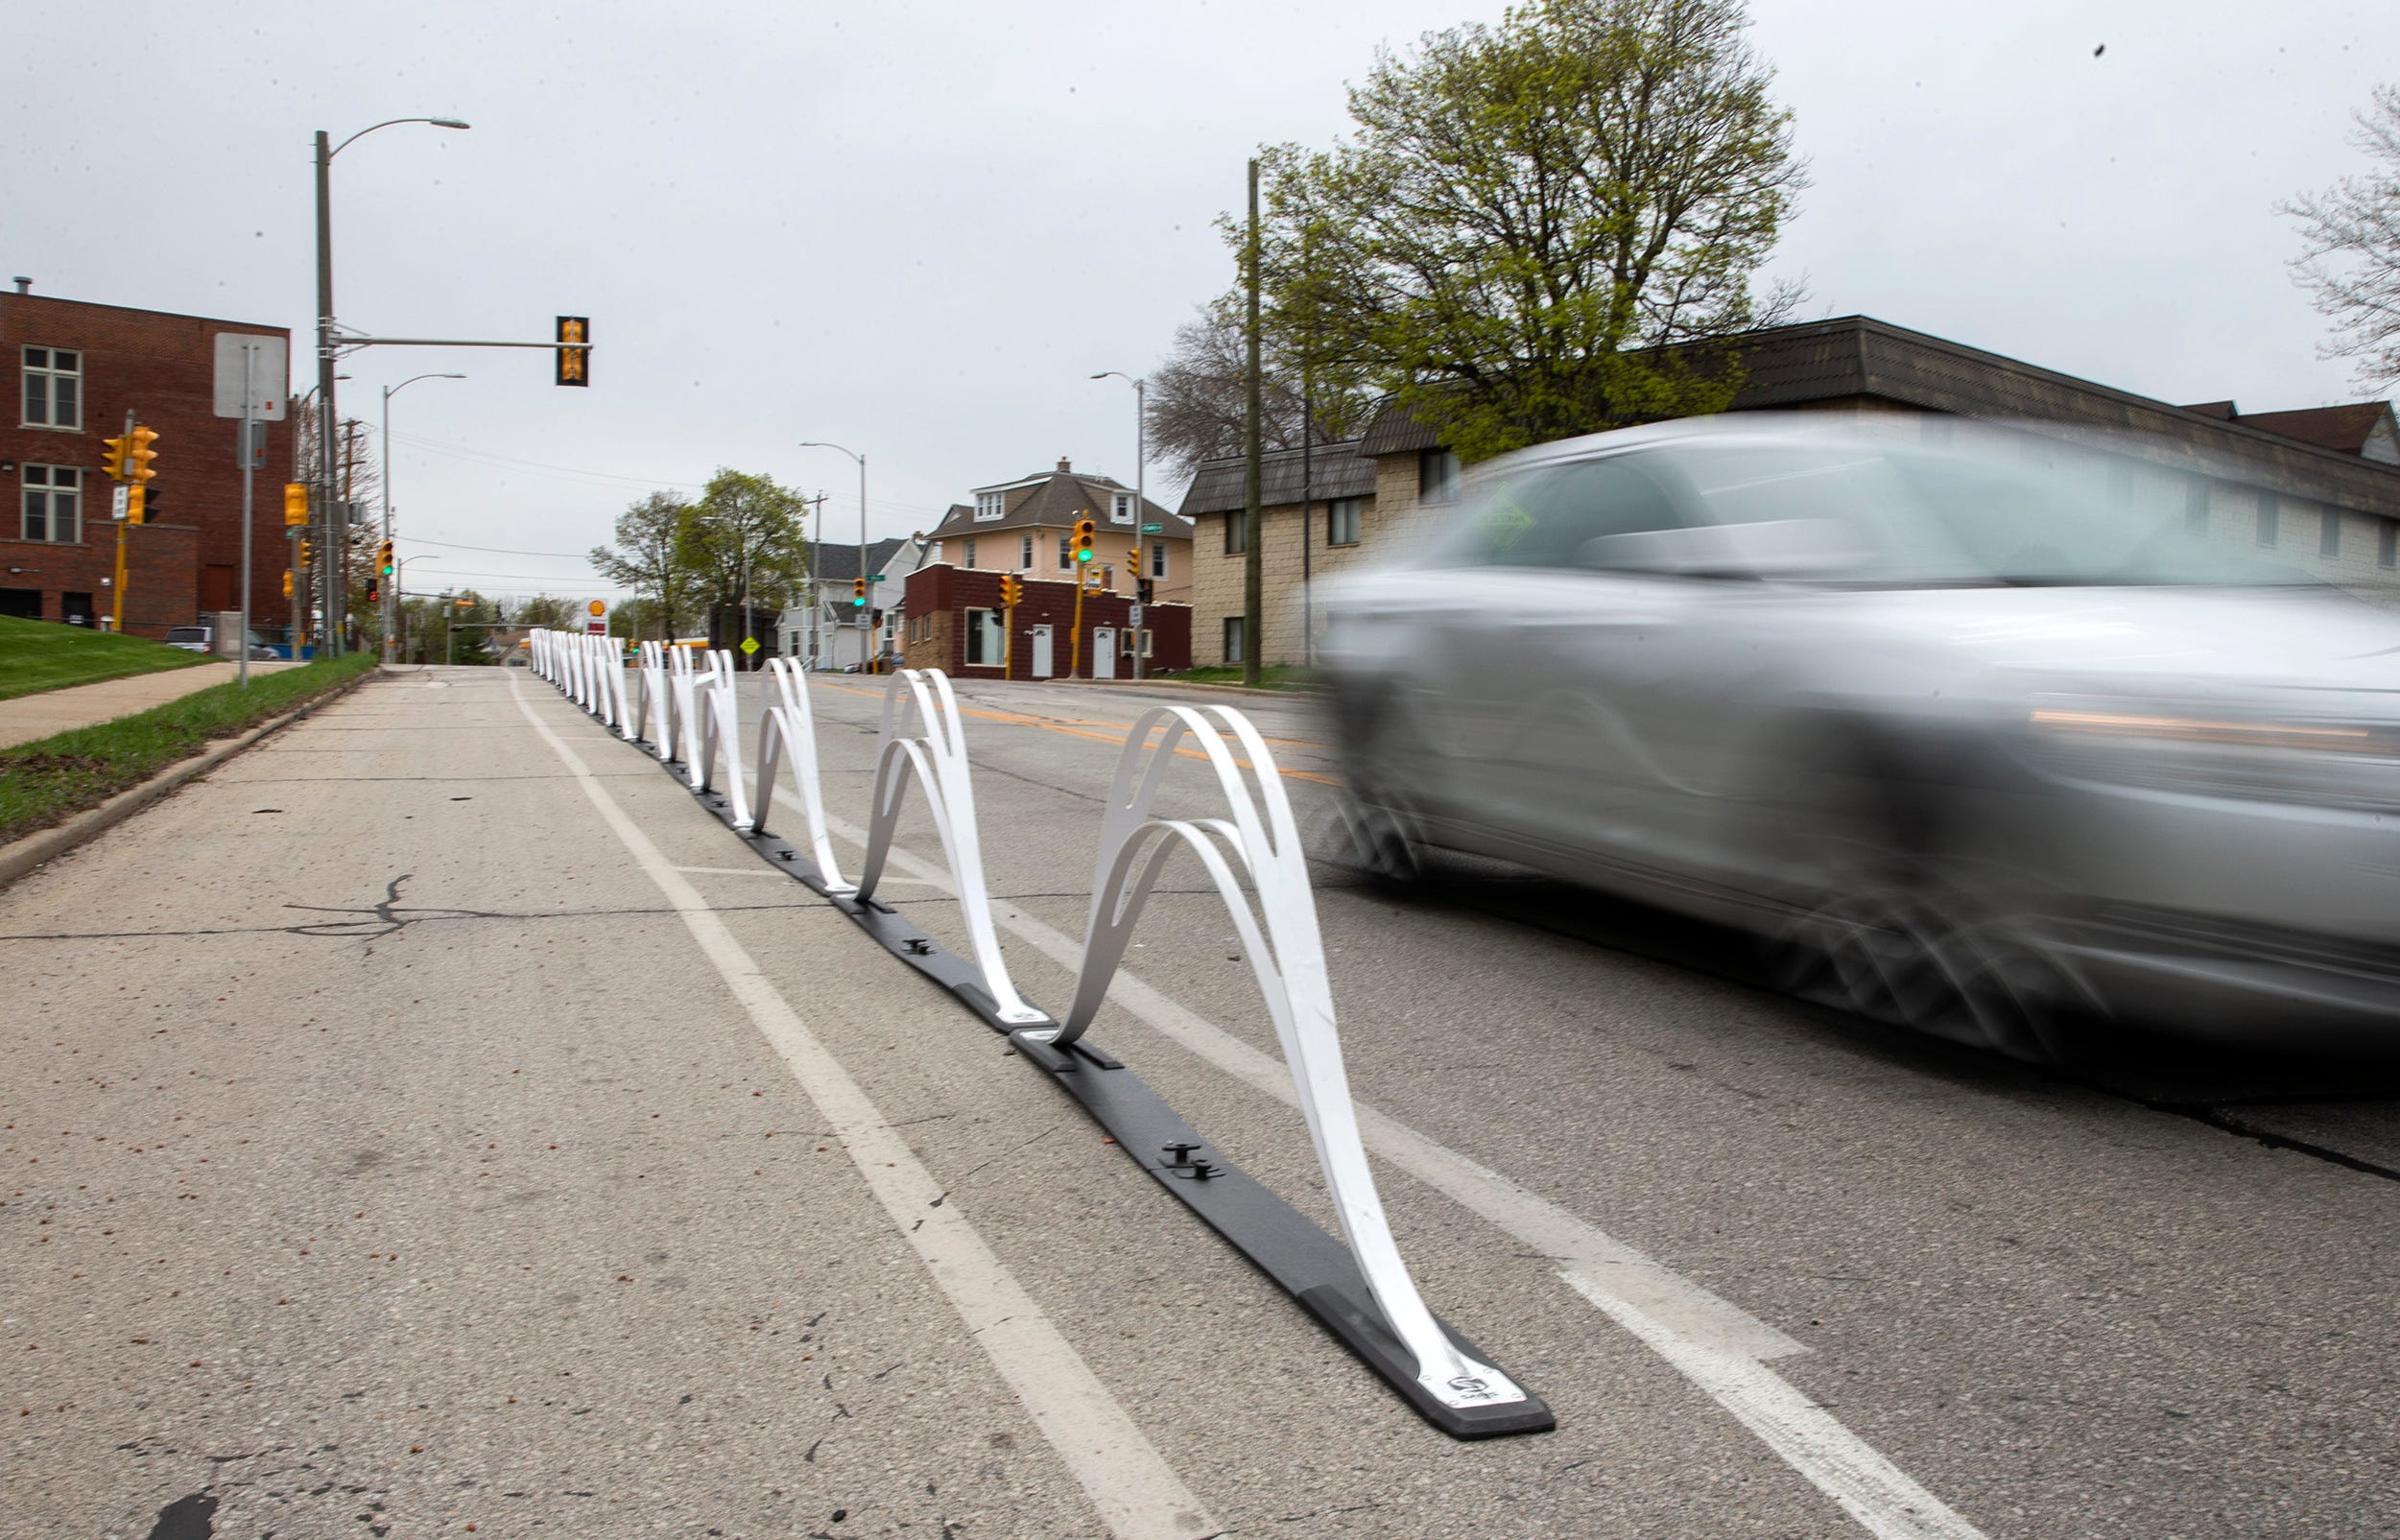 Wave delineators are placed to divide bike lane and driving lane and automobile lanes on Tuesday, May 5, 2020 on North Hawley Road.